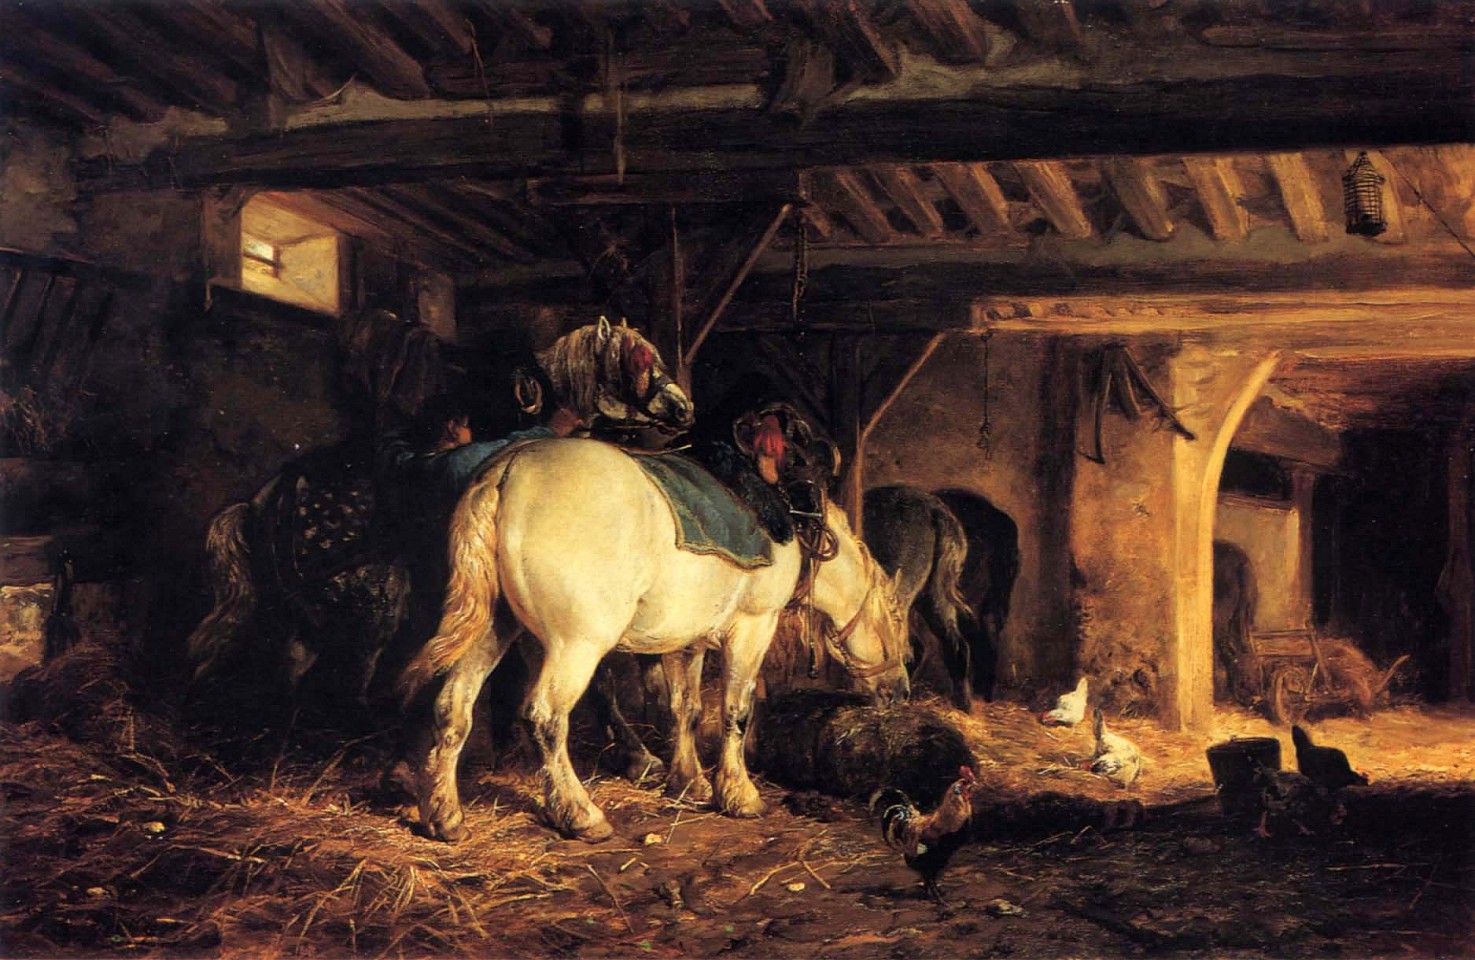 Charles Emile Jacque, In the Stable, ca. 1873-75
Oil on canvas, 19 1/2 x 29 1/2 in. (49.5 x 74.9 cm)
JAC-003-PA